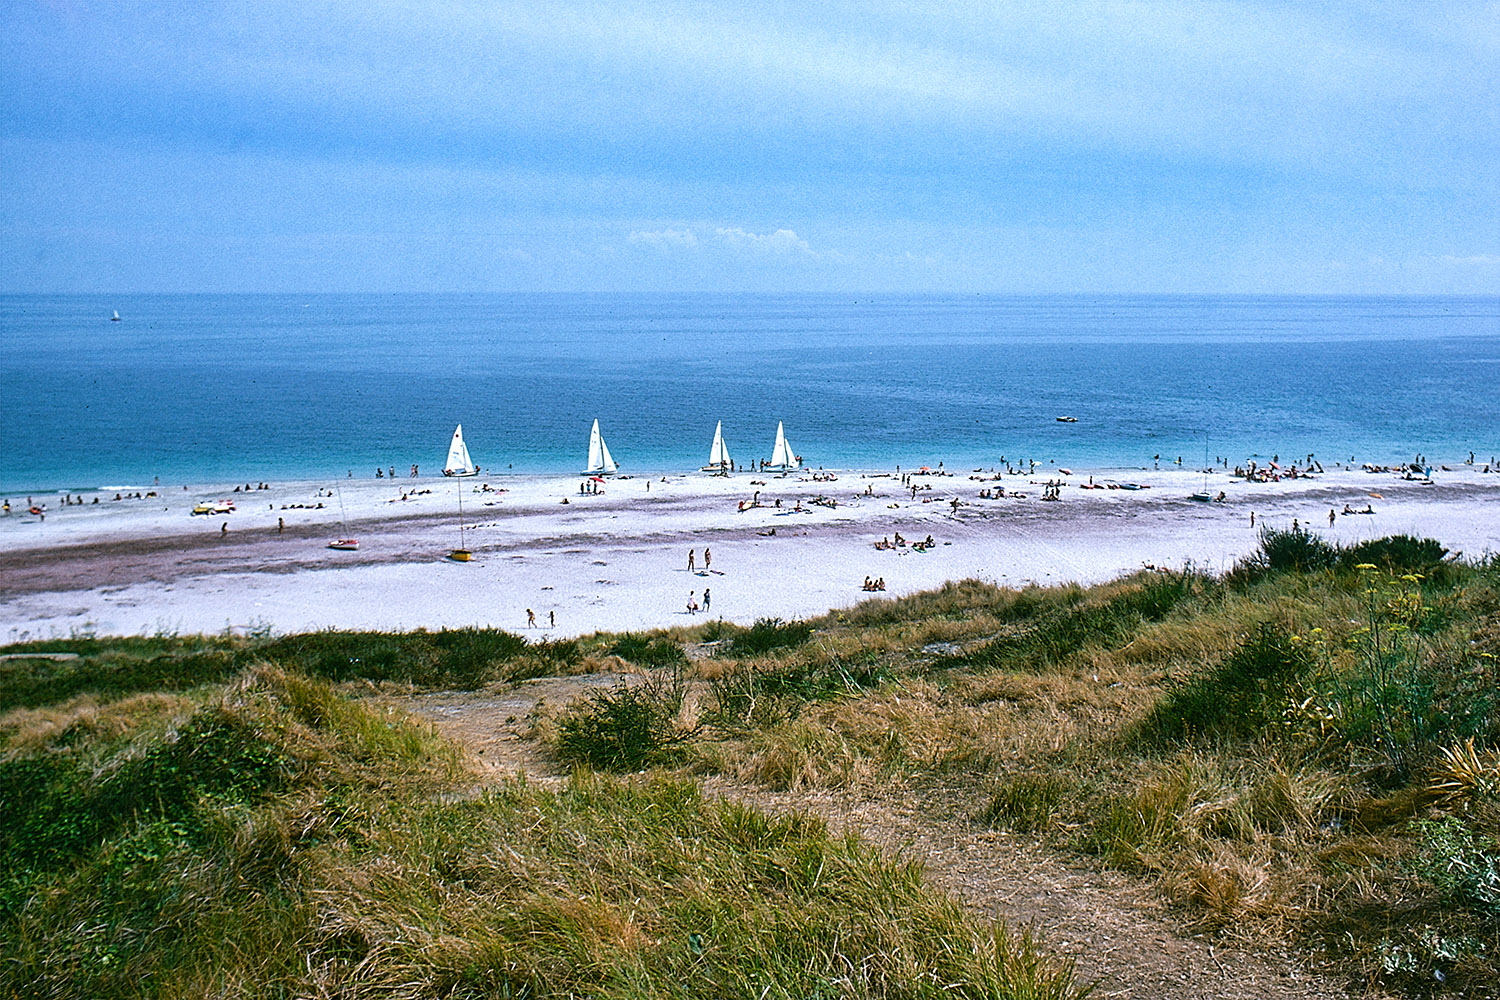 'Plage des Sables Rouges', a beach on the east end of the island